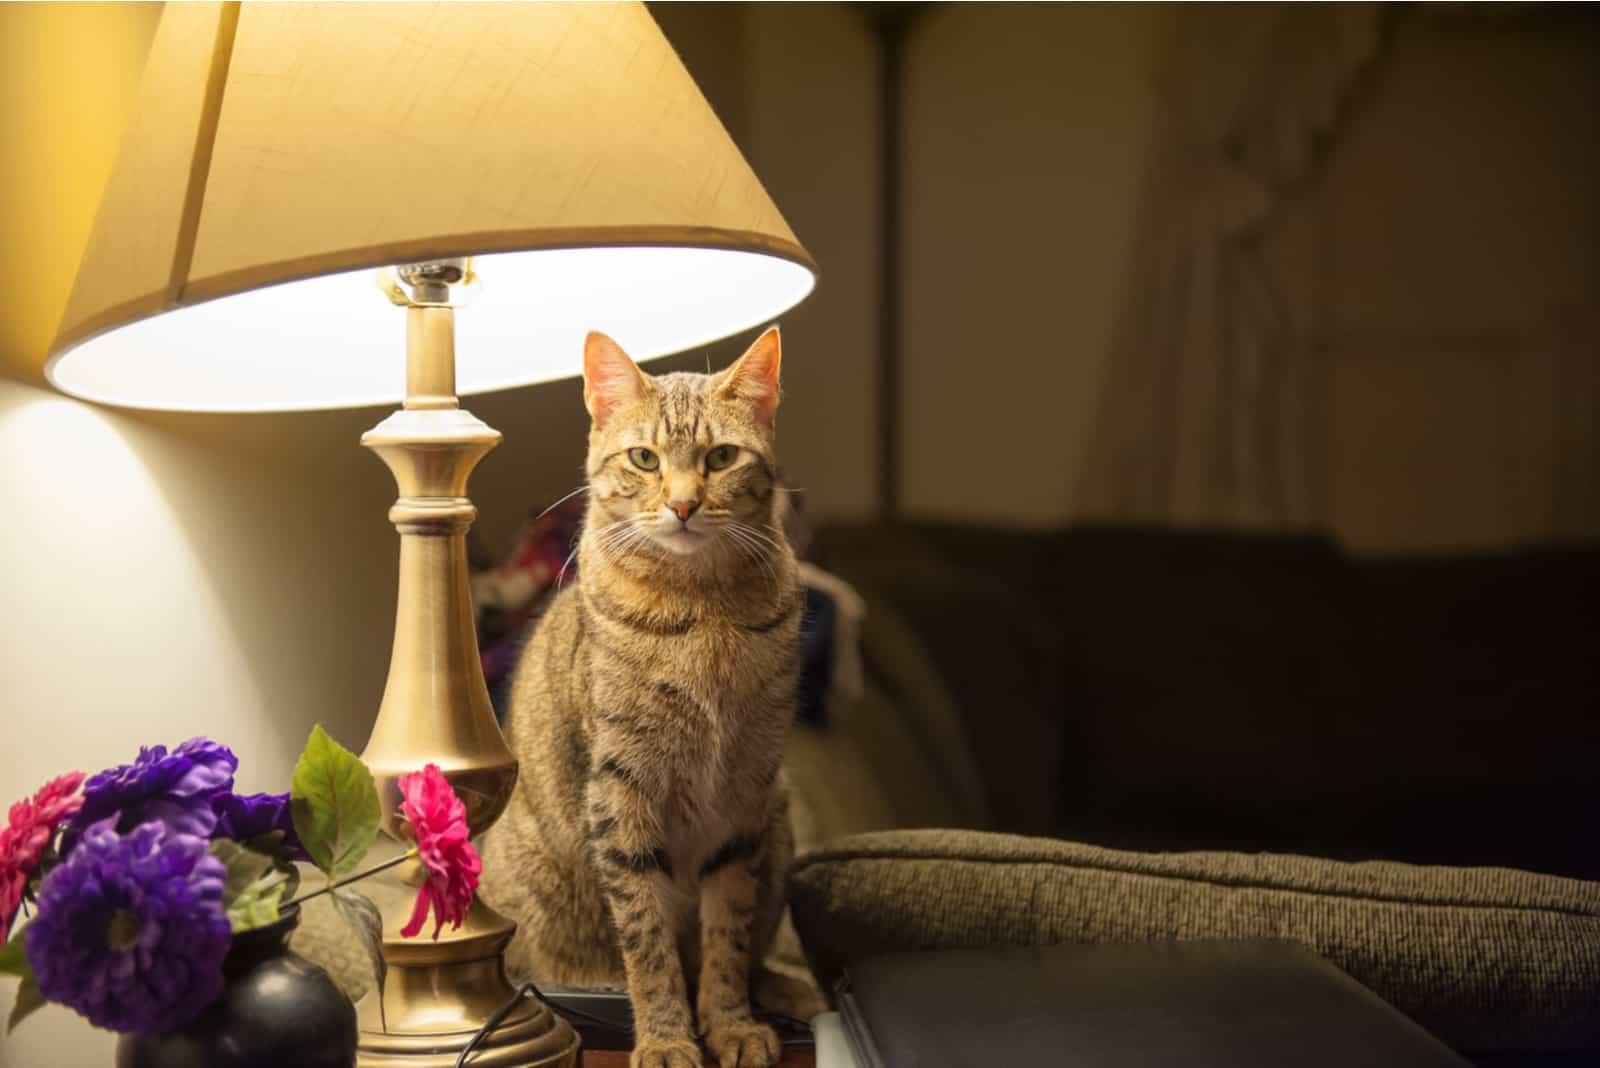 A beautiful cat sits on an end table and directly beneath a table lamp